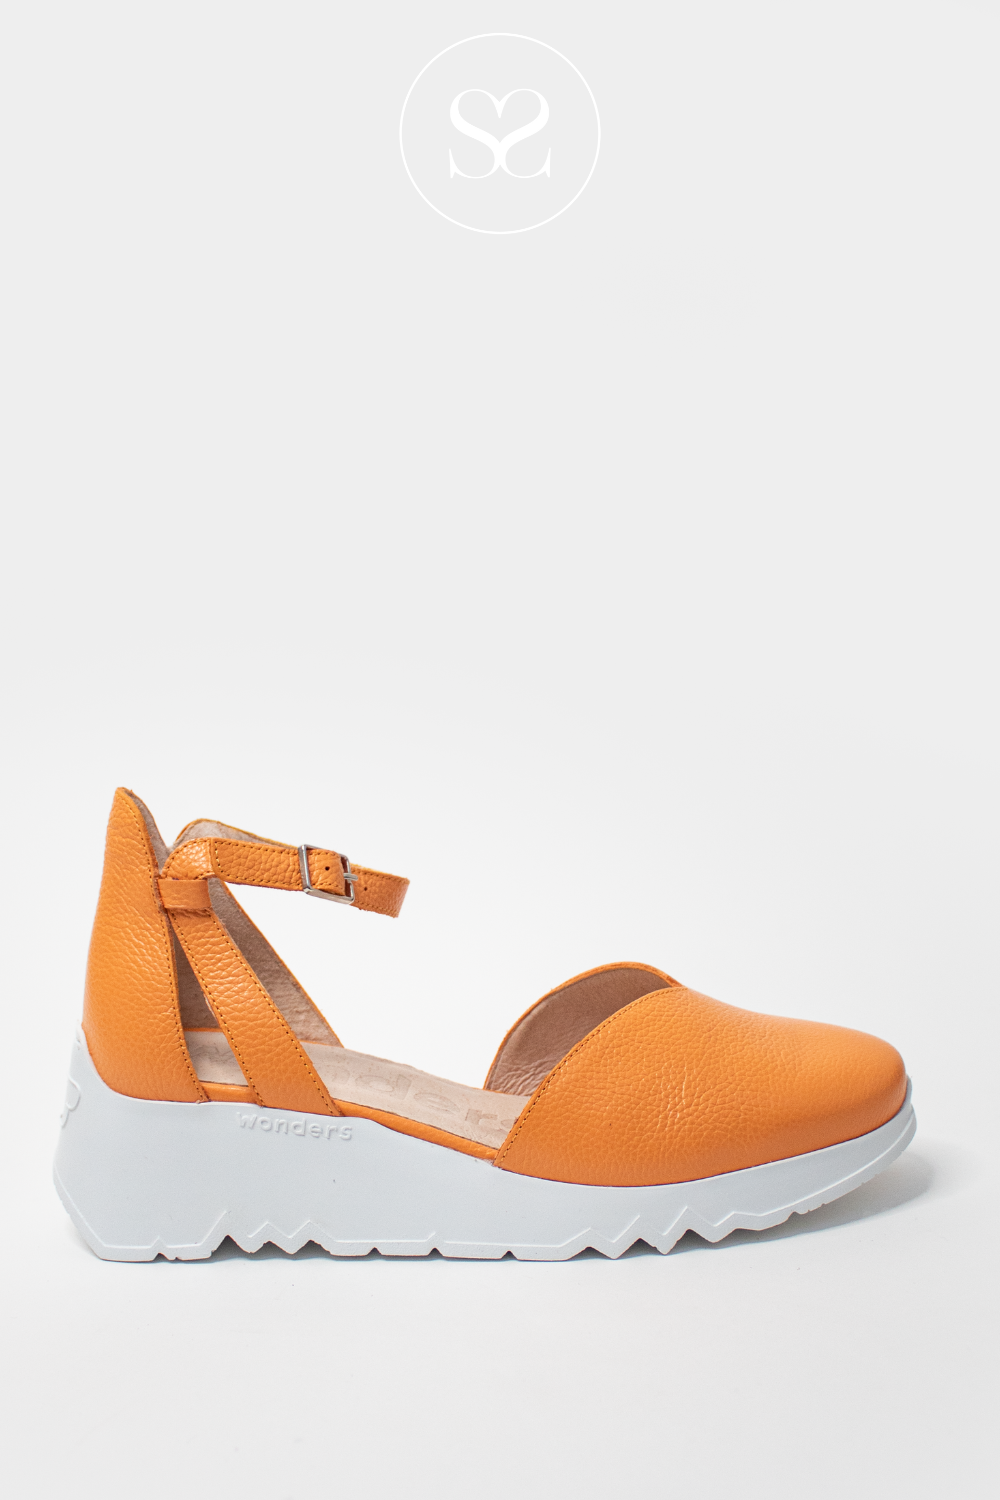 WONDERS E-6703 ORANGE LEATHER CLOSED TOE SANDAL WITH A WEDGE AND ANKLE STRAP